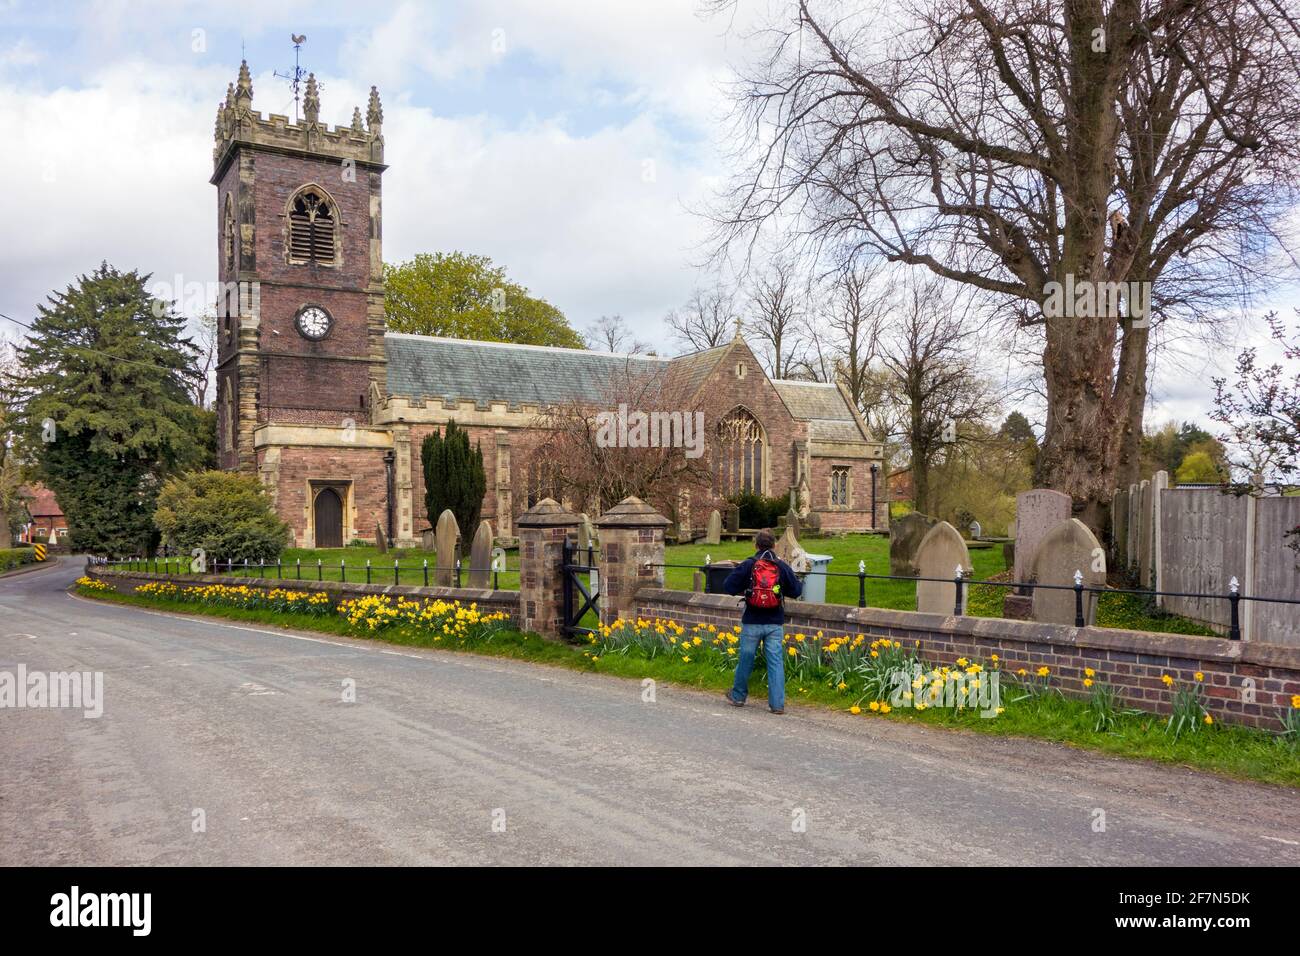 Man walking past St Leonard's Church and churchyard  in the village of Warmingham near Crewe Cheshire  in the springtime with daffodills Stock Photo